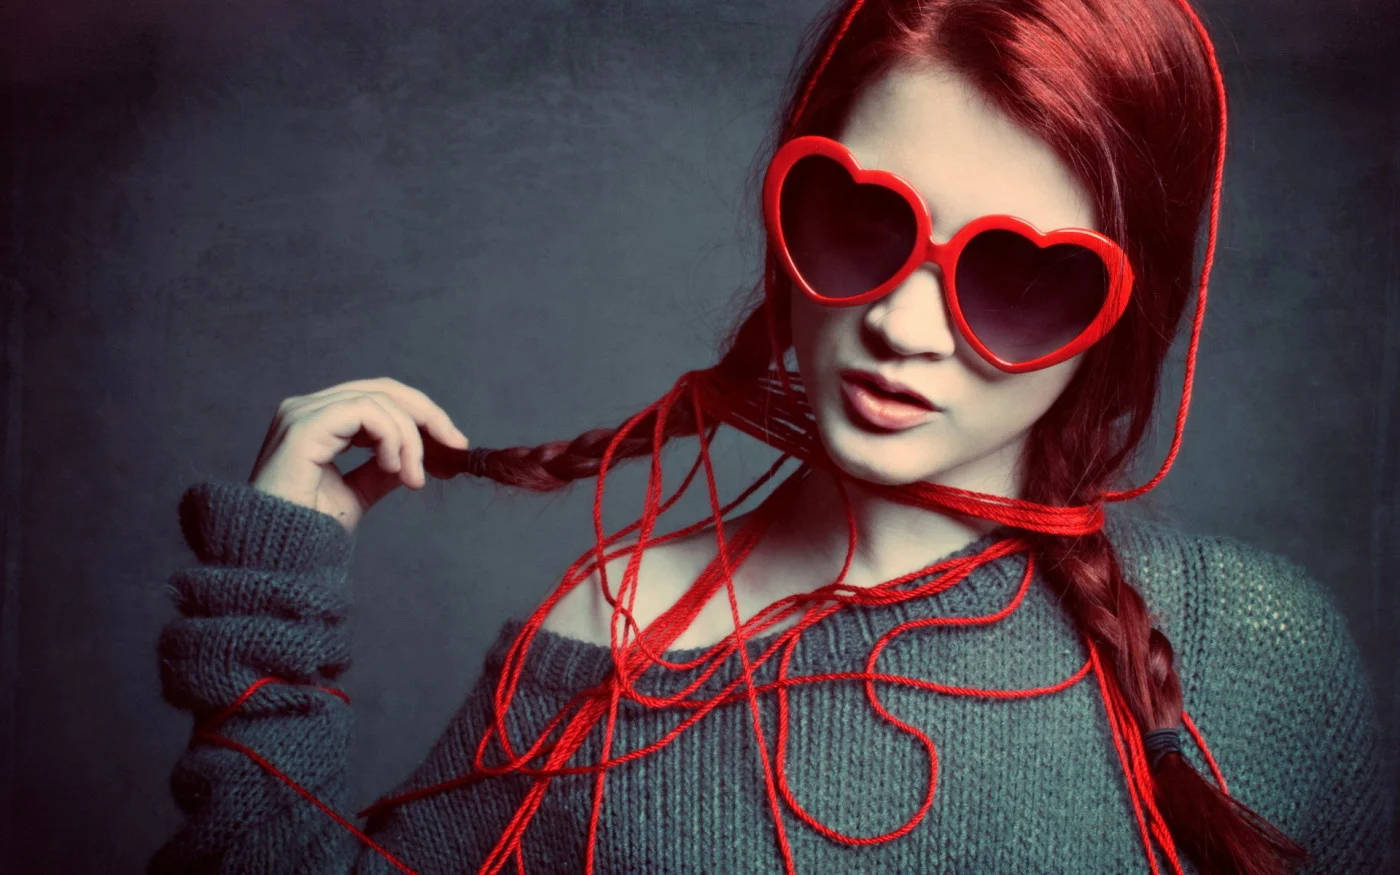 Cool Attitude Girl With Braided Red Hair Background